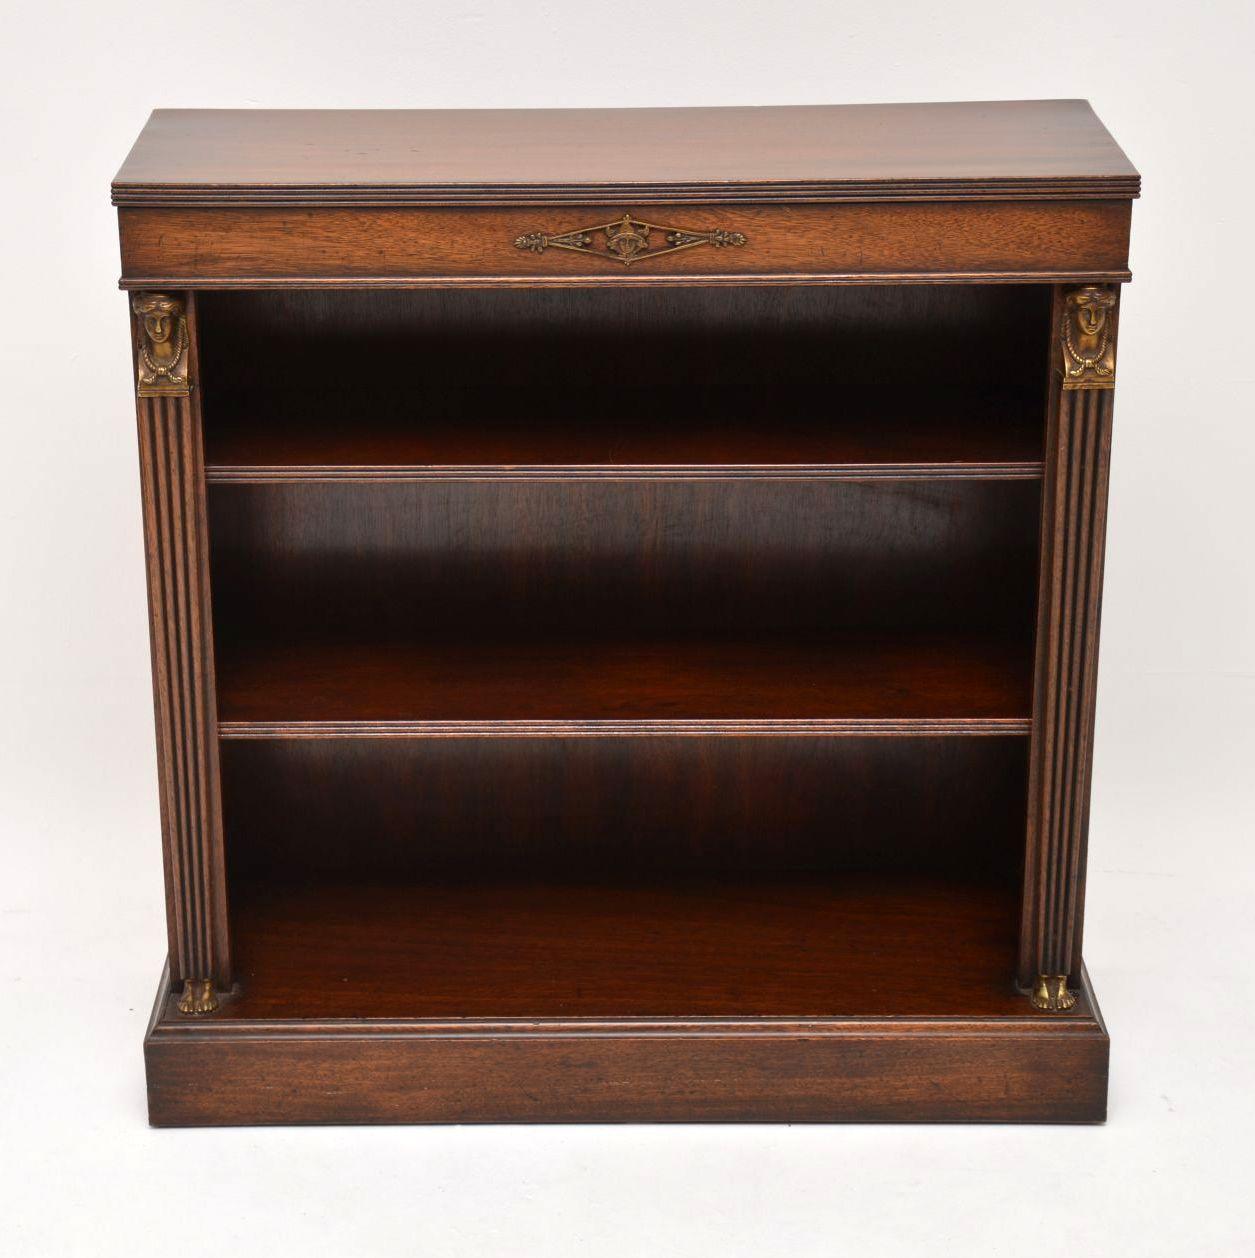 Small antique neoclassical Empire style mahogany open bookcase in excellent condition and dating from circa 1930s period. It has a reeded top edge and reeded tapered side columns, topped with gilt bronze faces with feet at the base. The shelves have